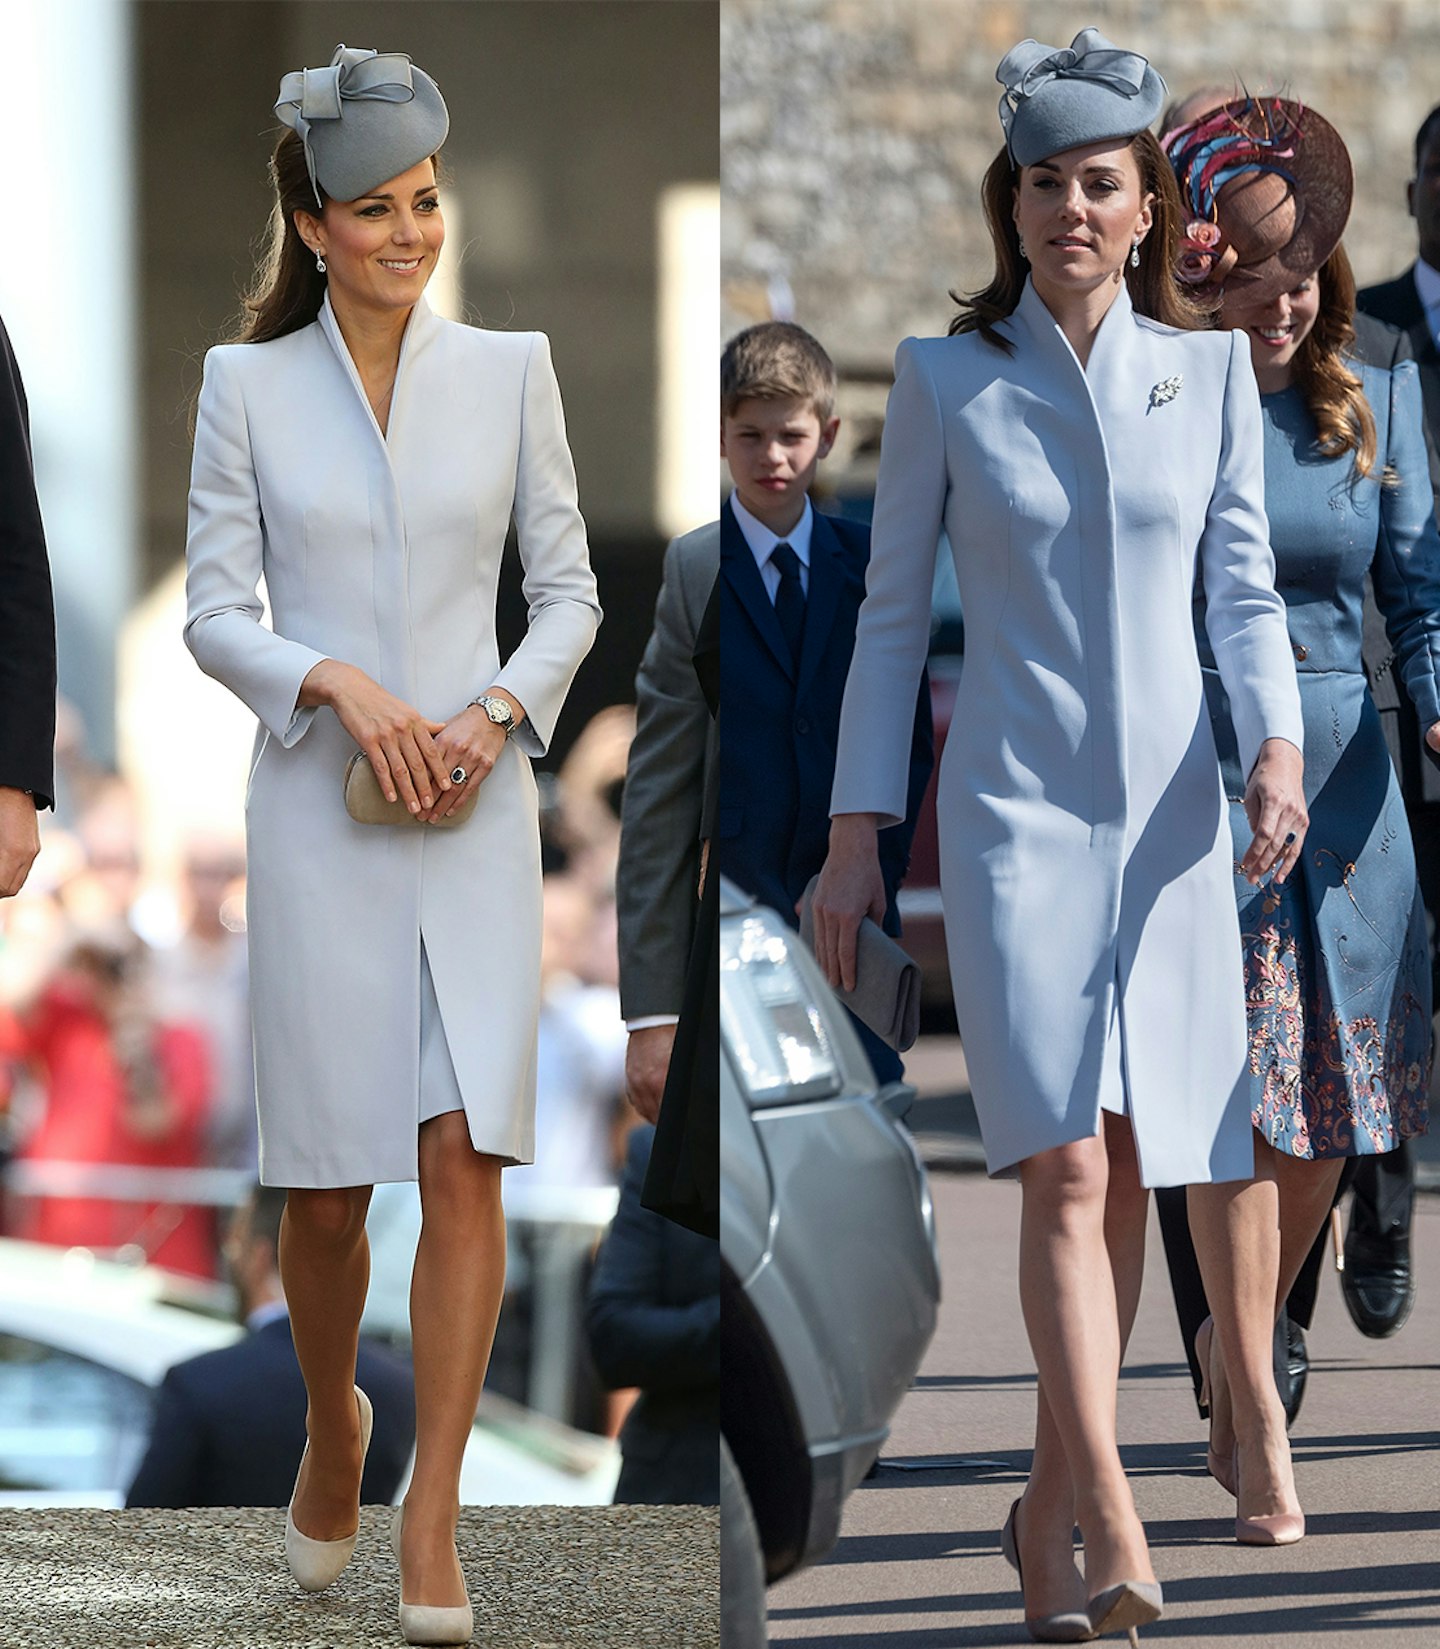 9 British Bag Brands Carried By Kate Middleton on Repeat